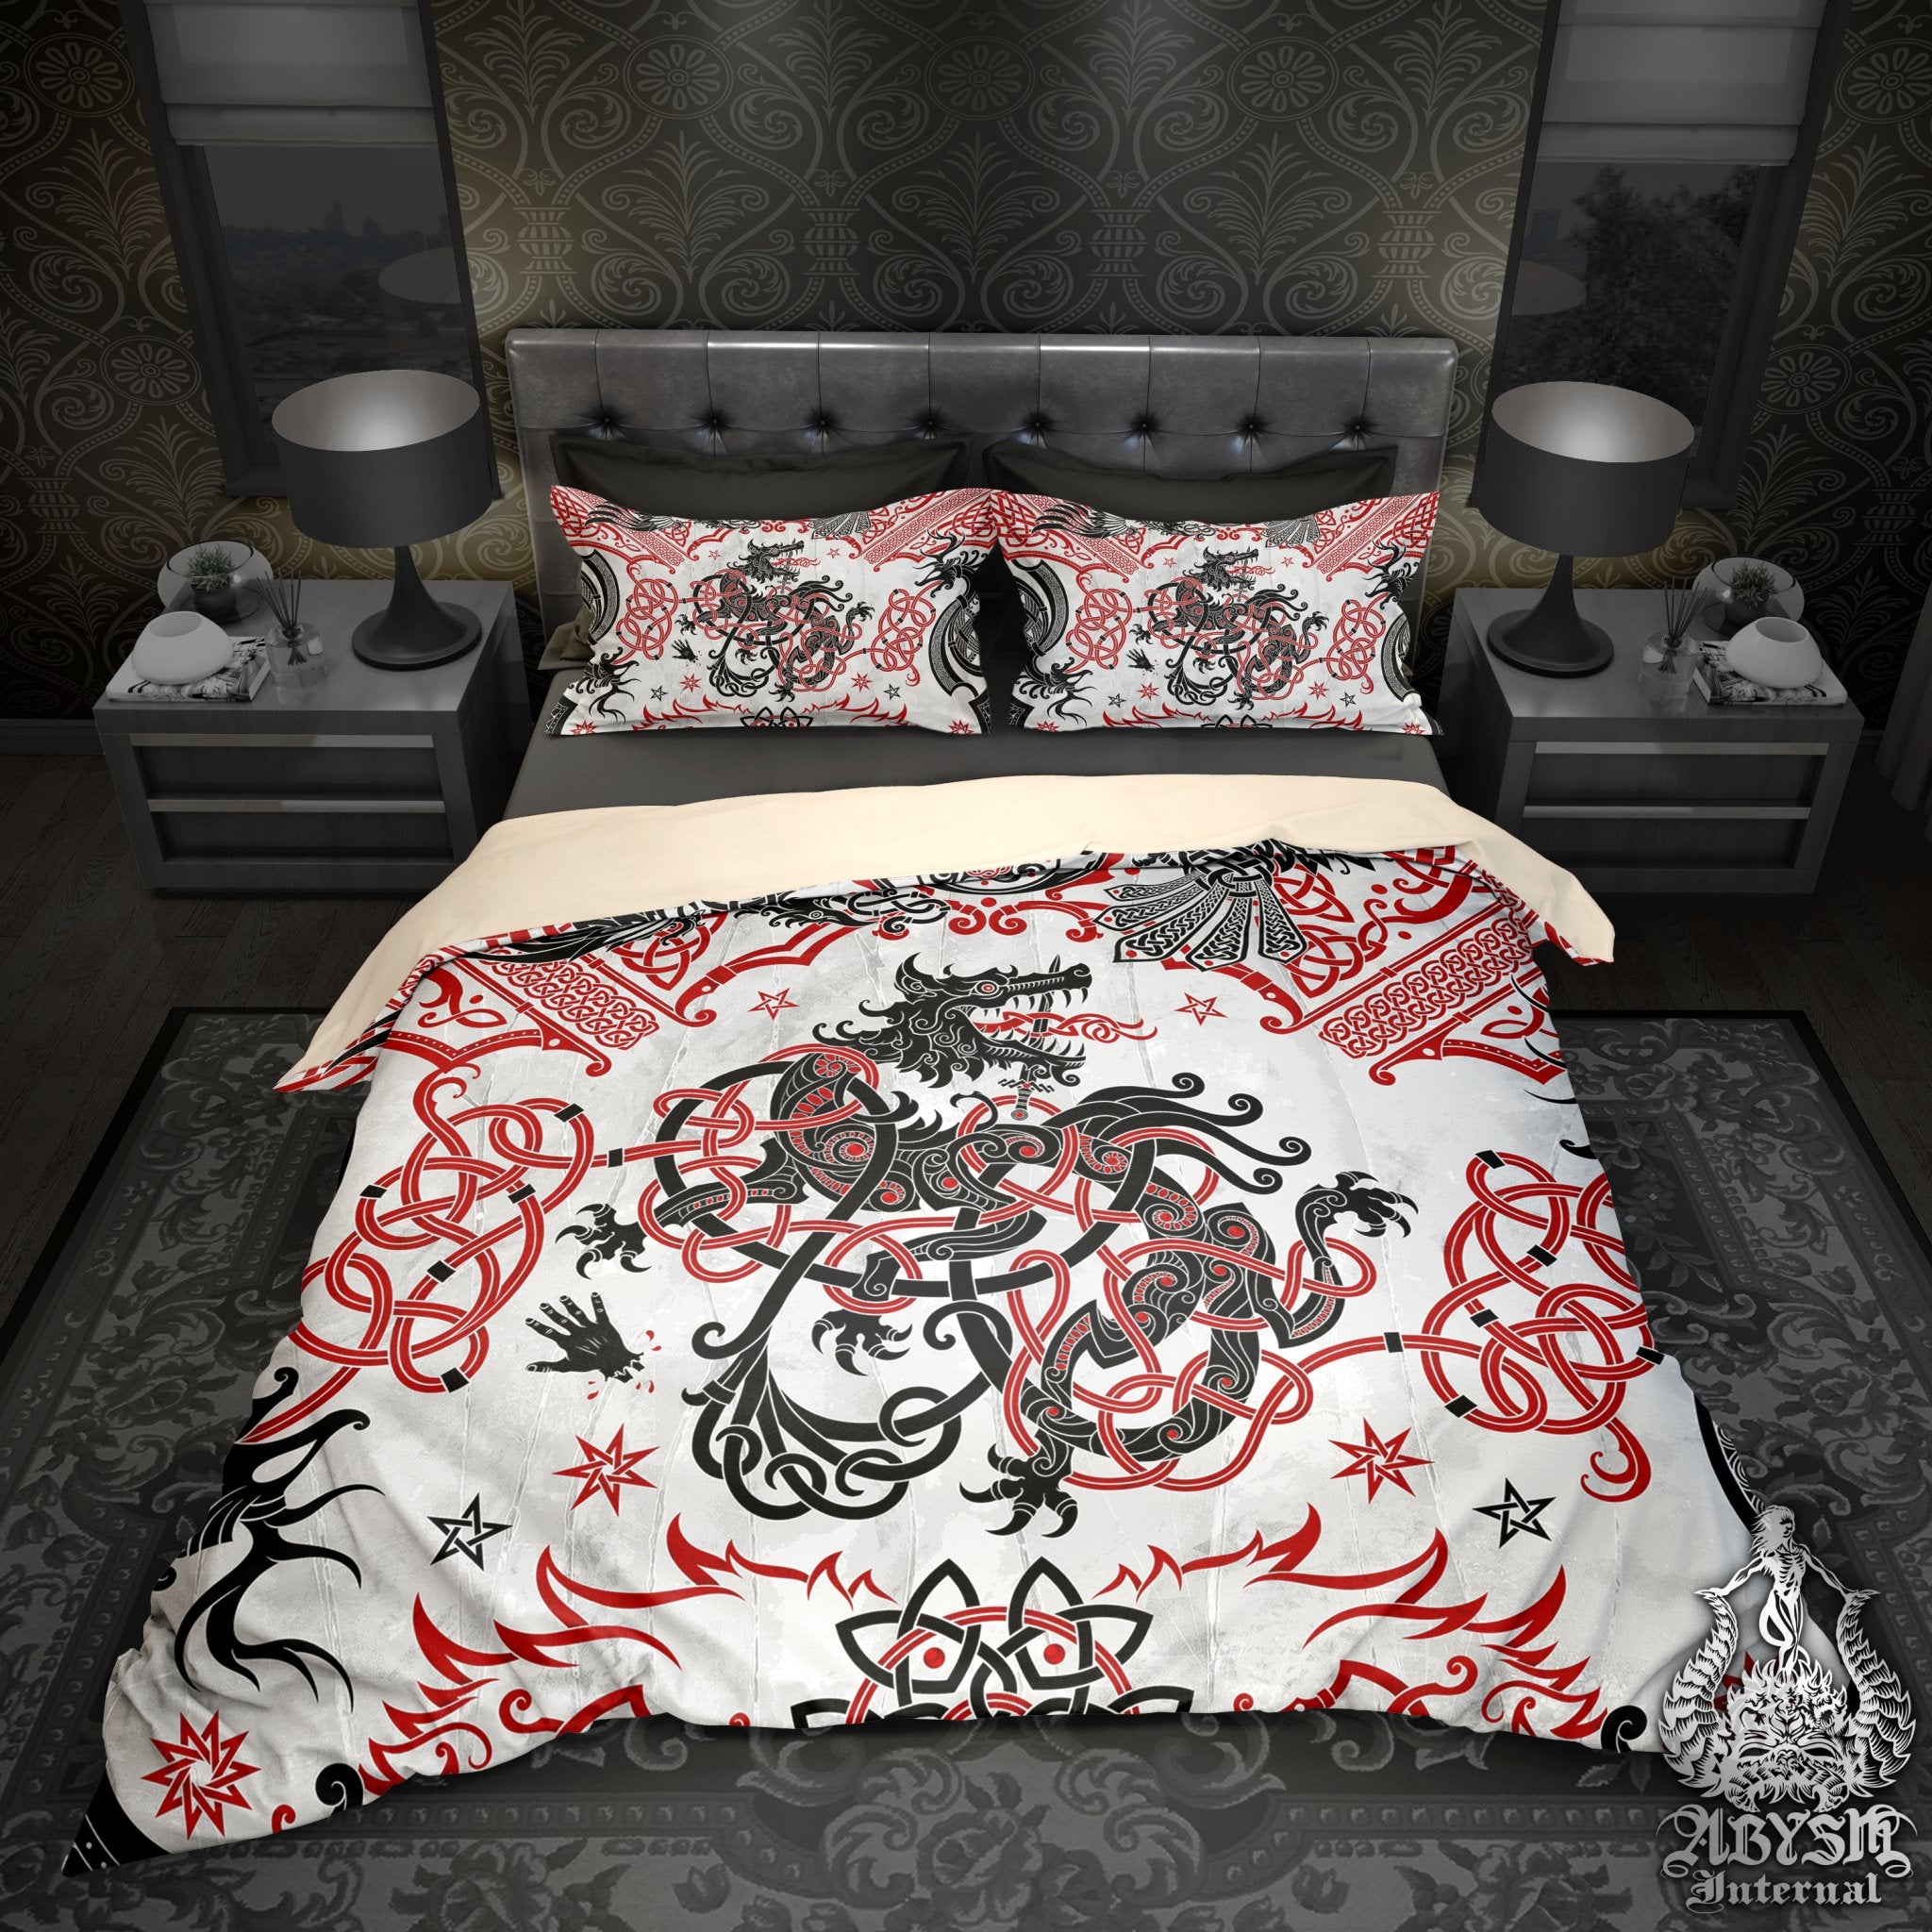 Viking Bedding Set, Comforter or Duvet, Norse Wolf Bed Cover and Bedroom Decor, Viking Art Print, King, Queen & Twin Size - White Red Black - Abysm Internal